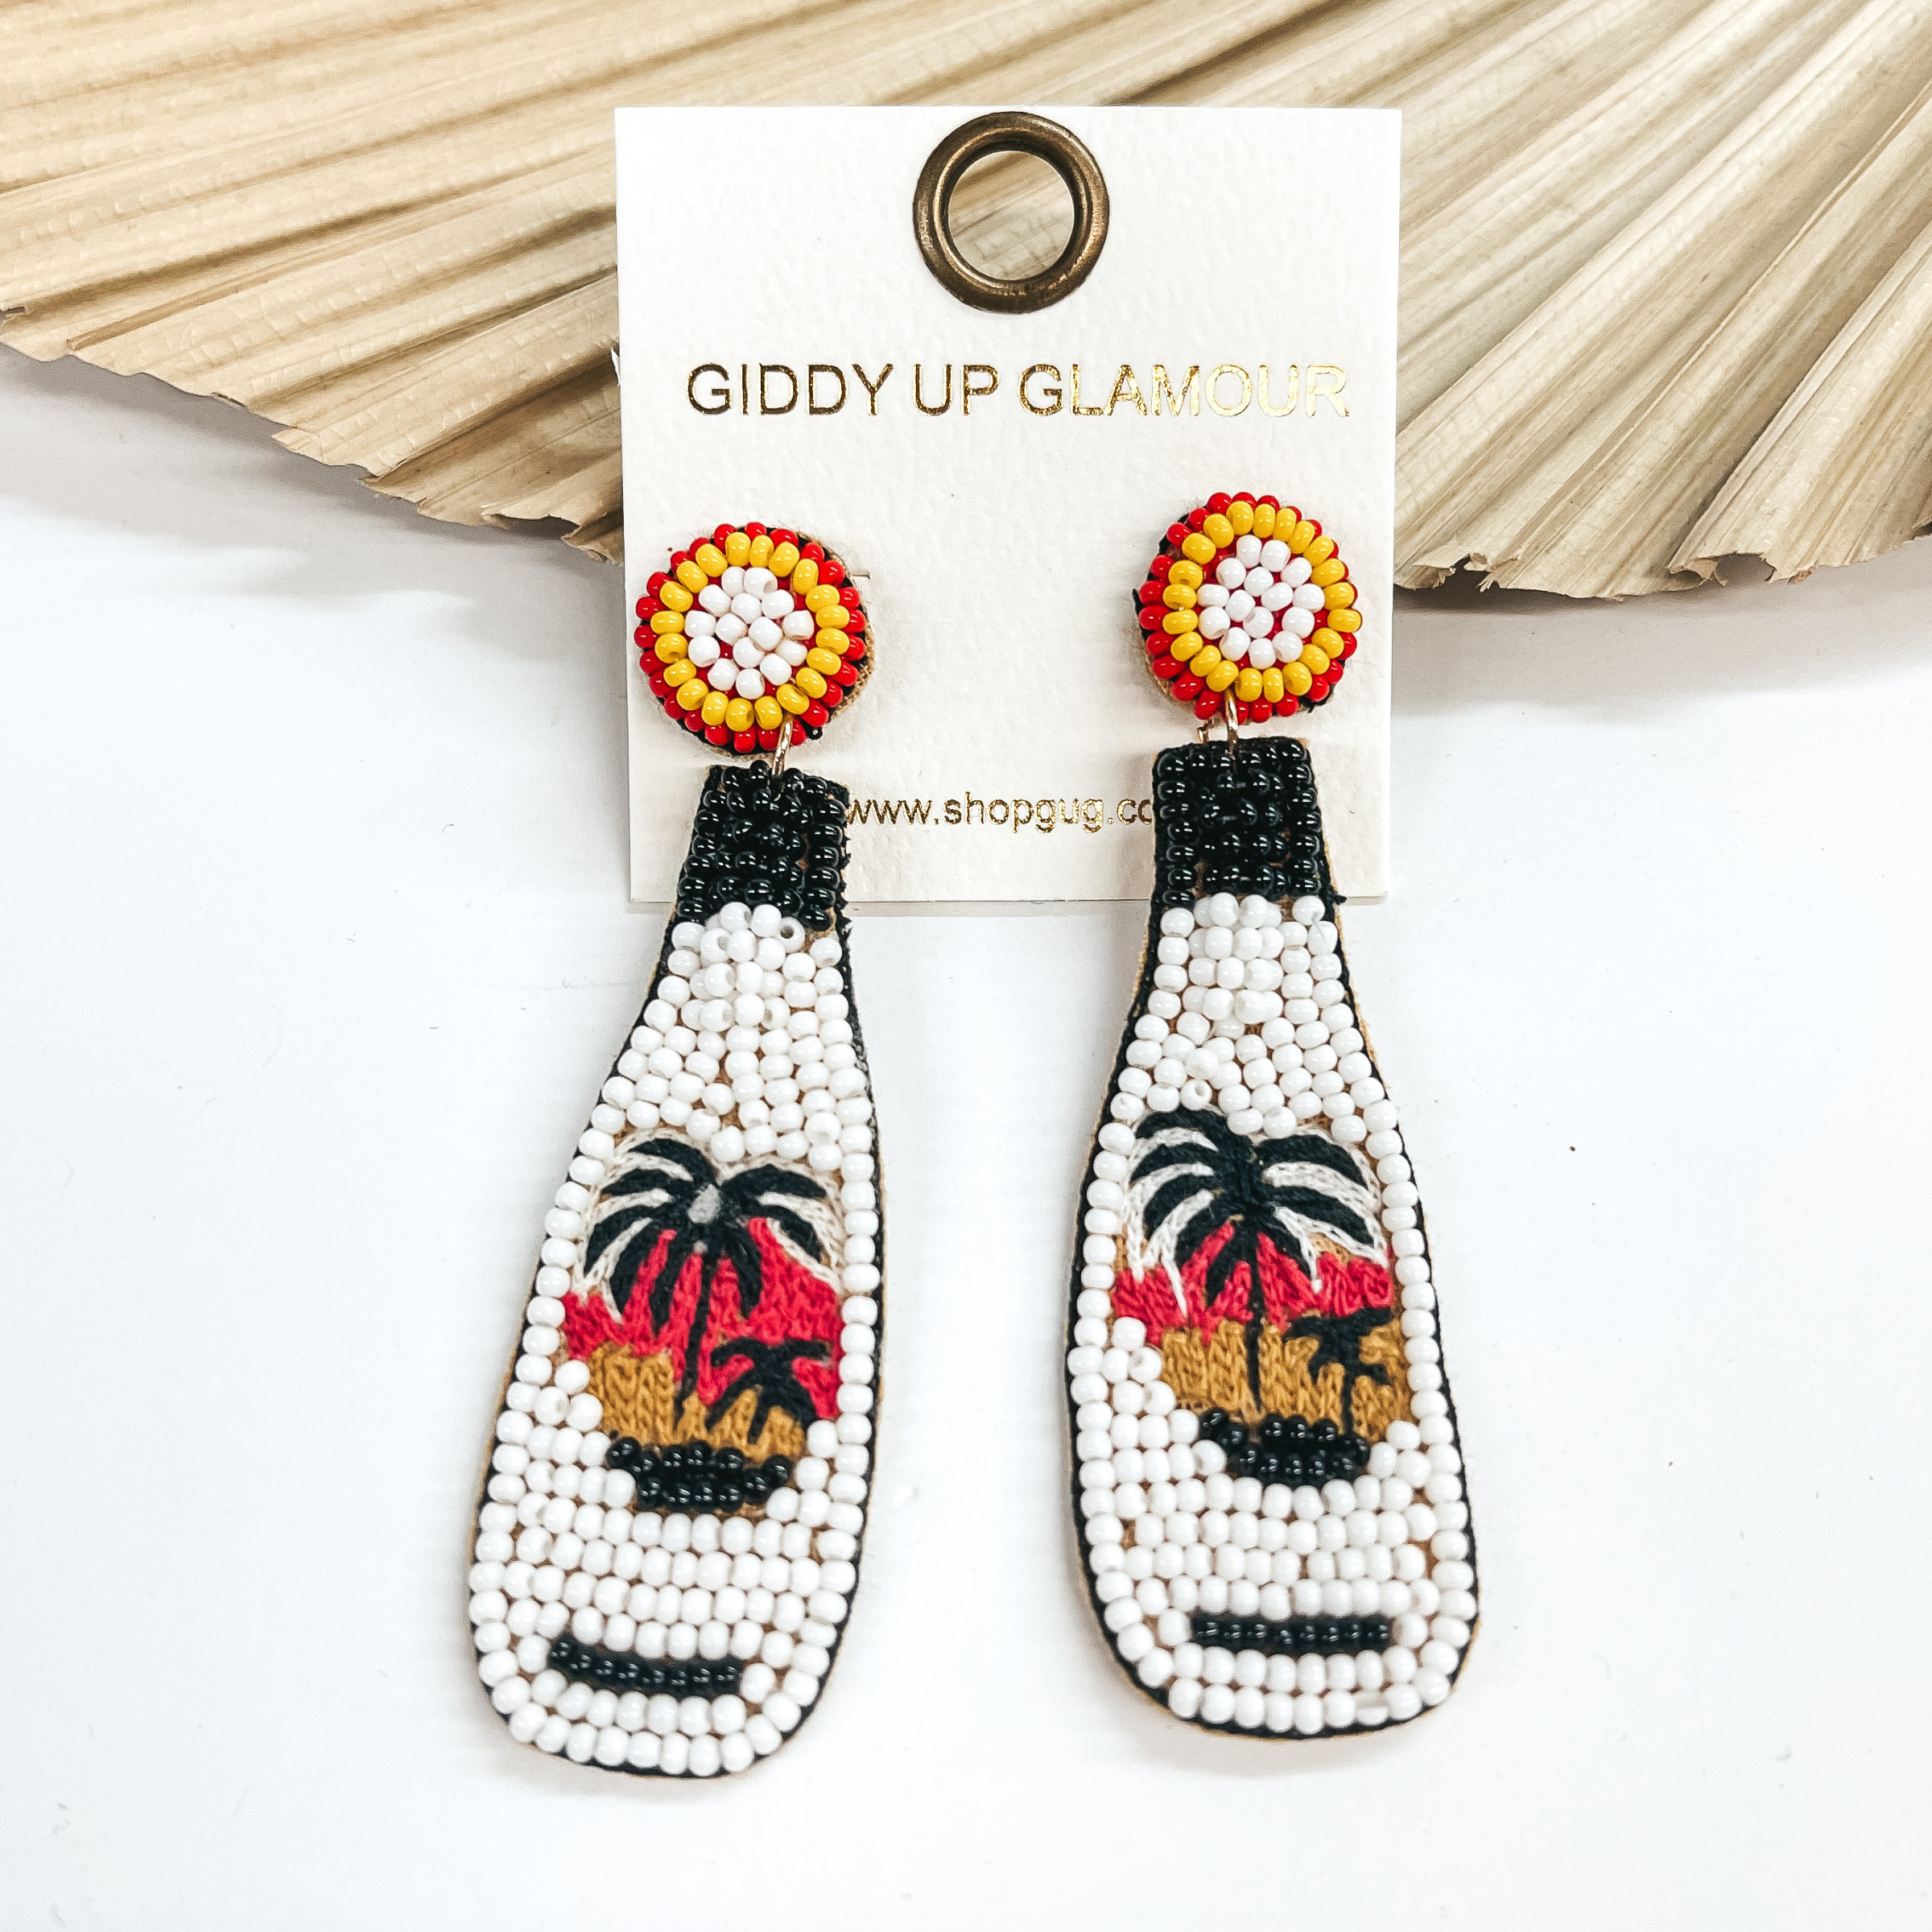 Post back earrings with a bottle drop with white, black, yellow, and red beads. In the middle there are  embroidered palm trees in a sunset. Taken on a white background and leaned up against a dried palm leaf.